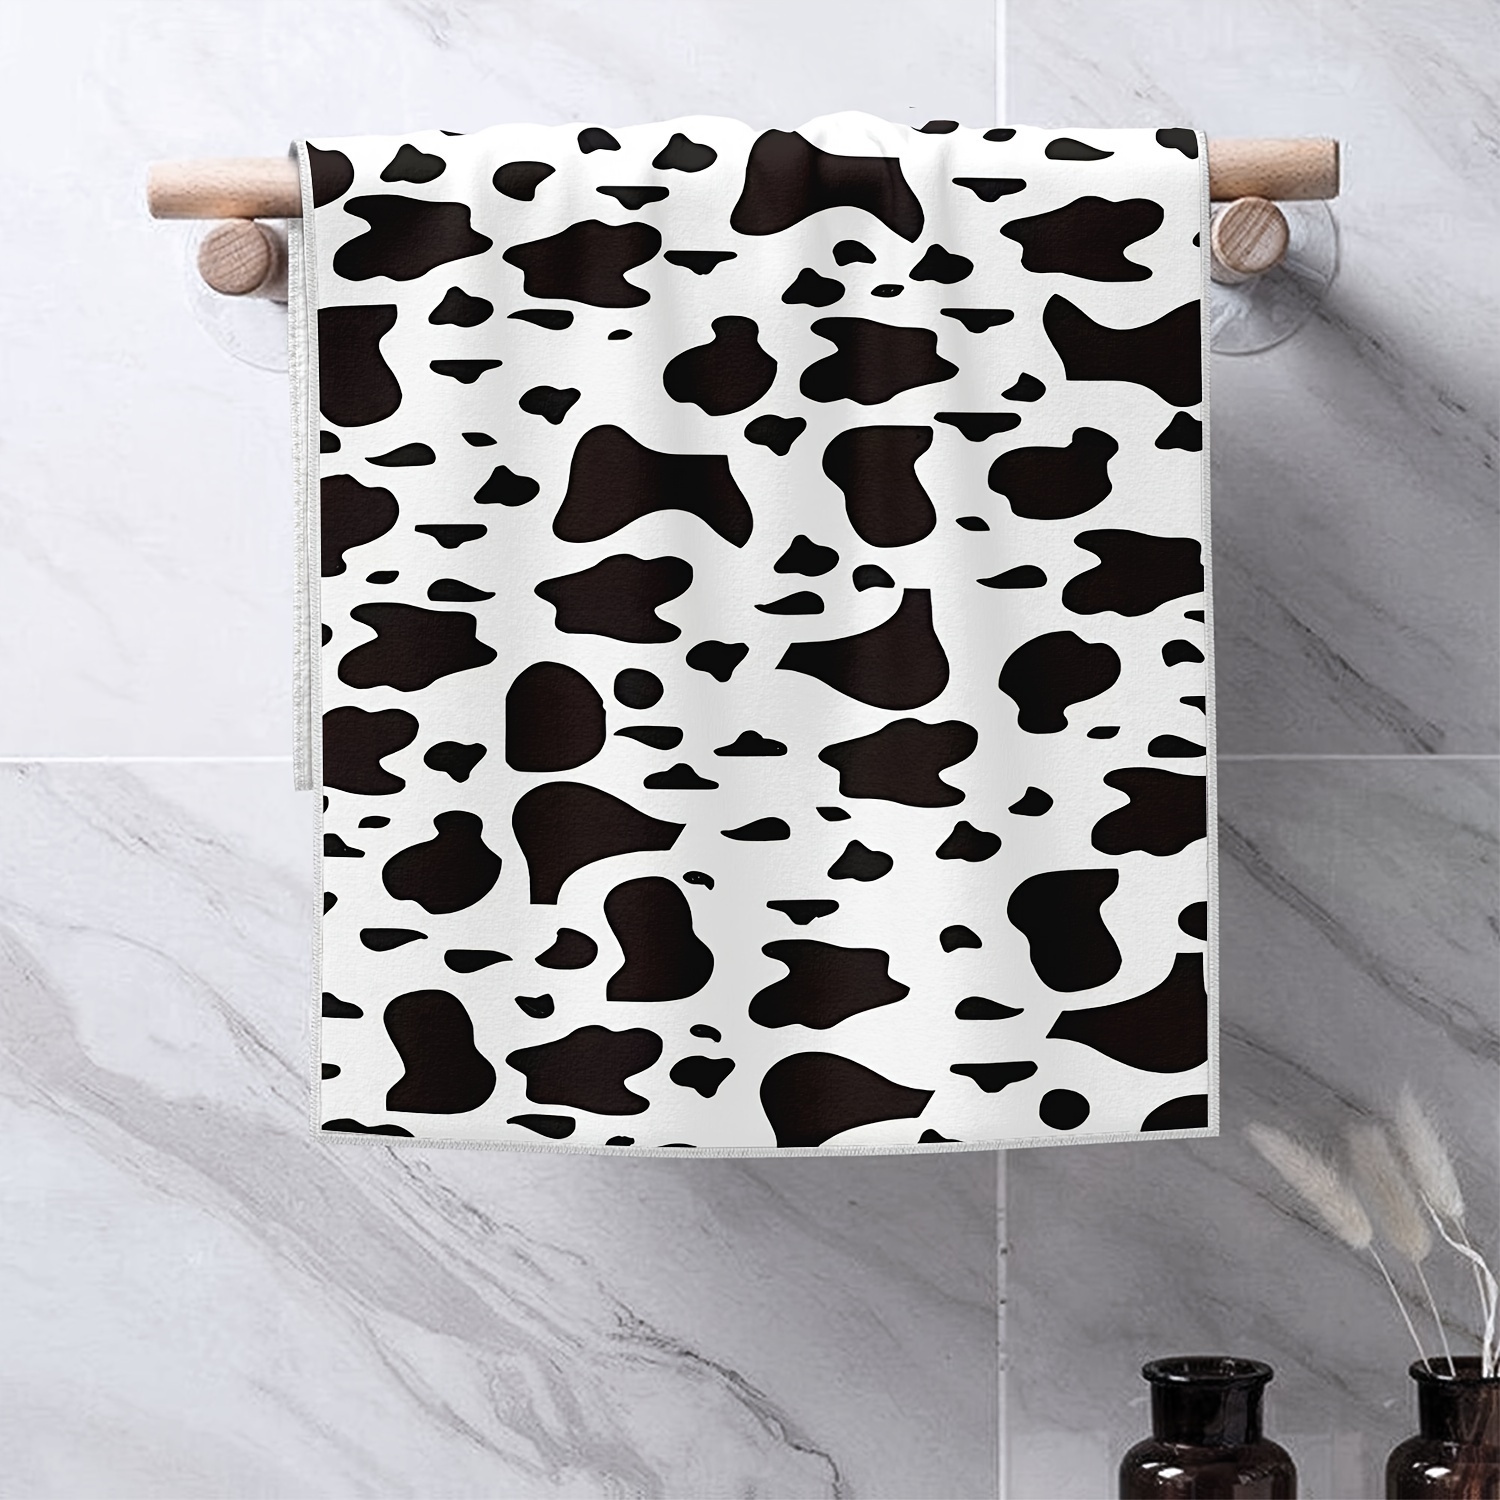 

2pcs, Contemporary Abstract Cow Print Kitchen Towels, Super Soft Microfiber, Machine Washable, Water Absorbent, Fade Resistant Dish Cloths For Drying & Cleaning